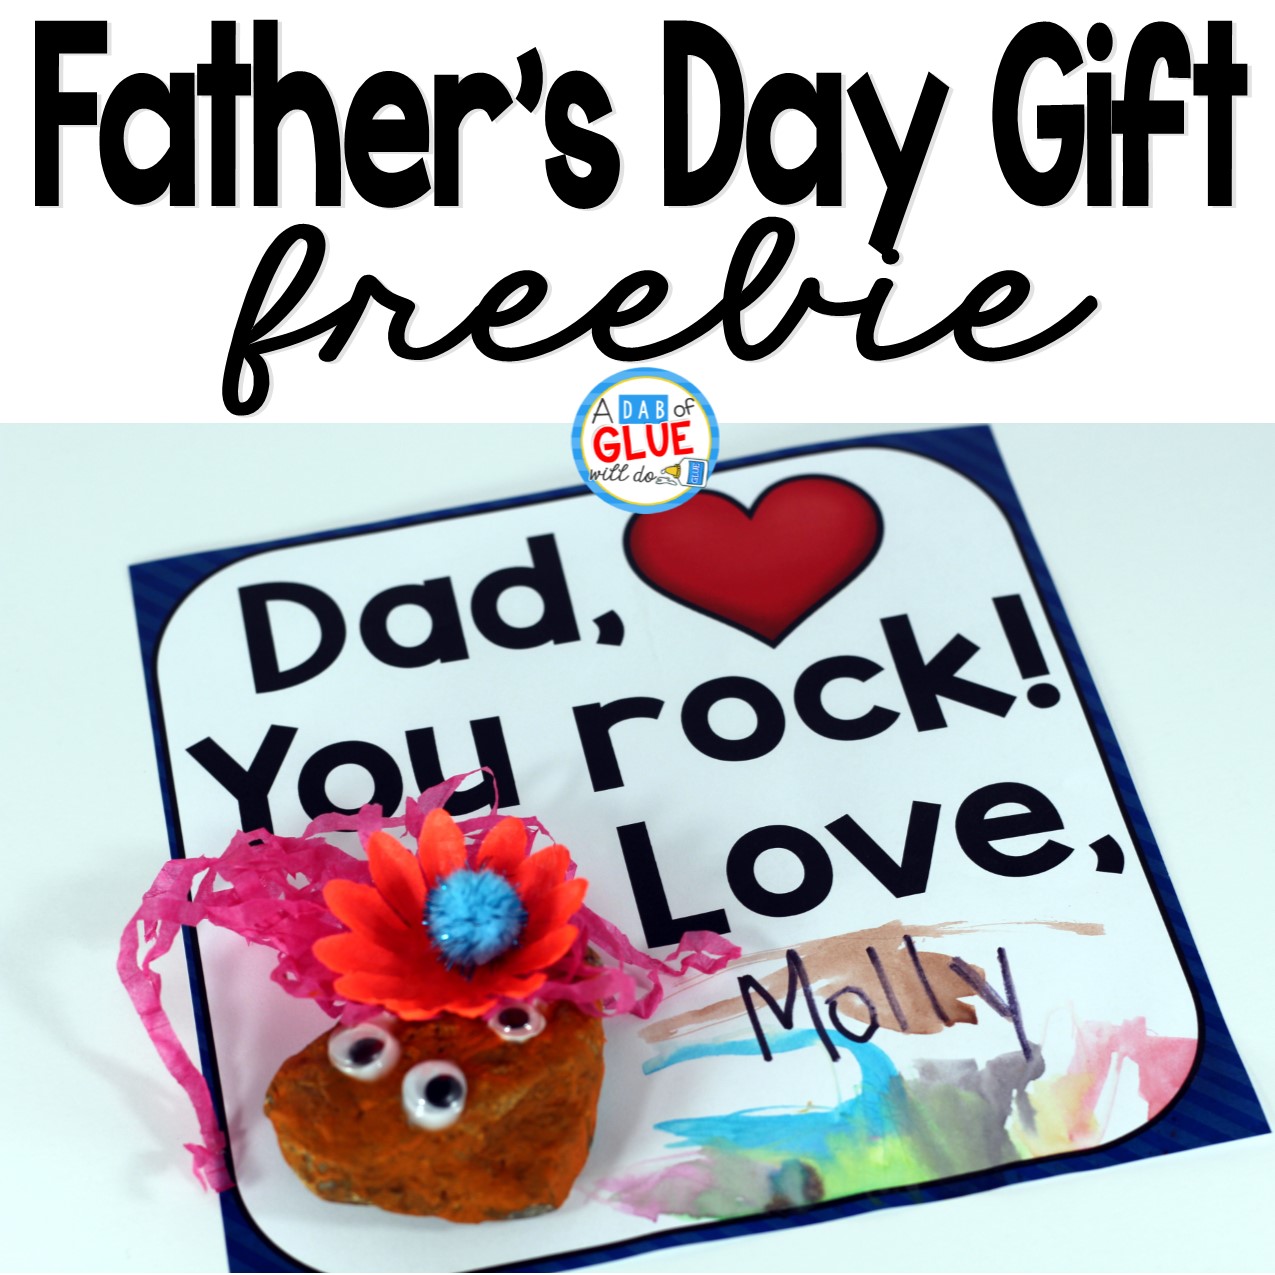 Here is a quick and easy father's day craft for FREE.